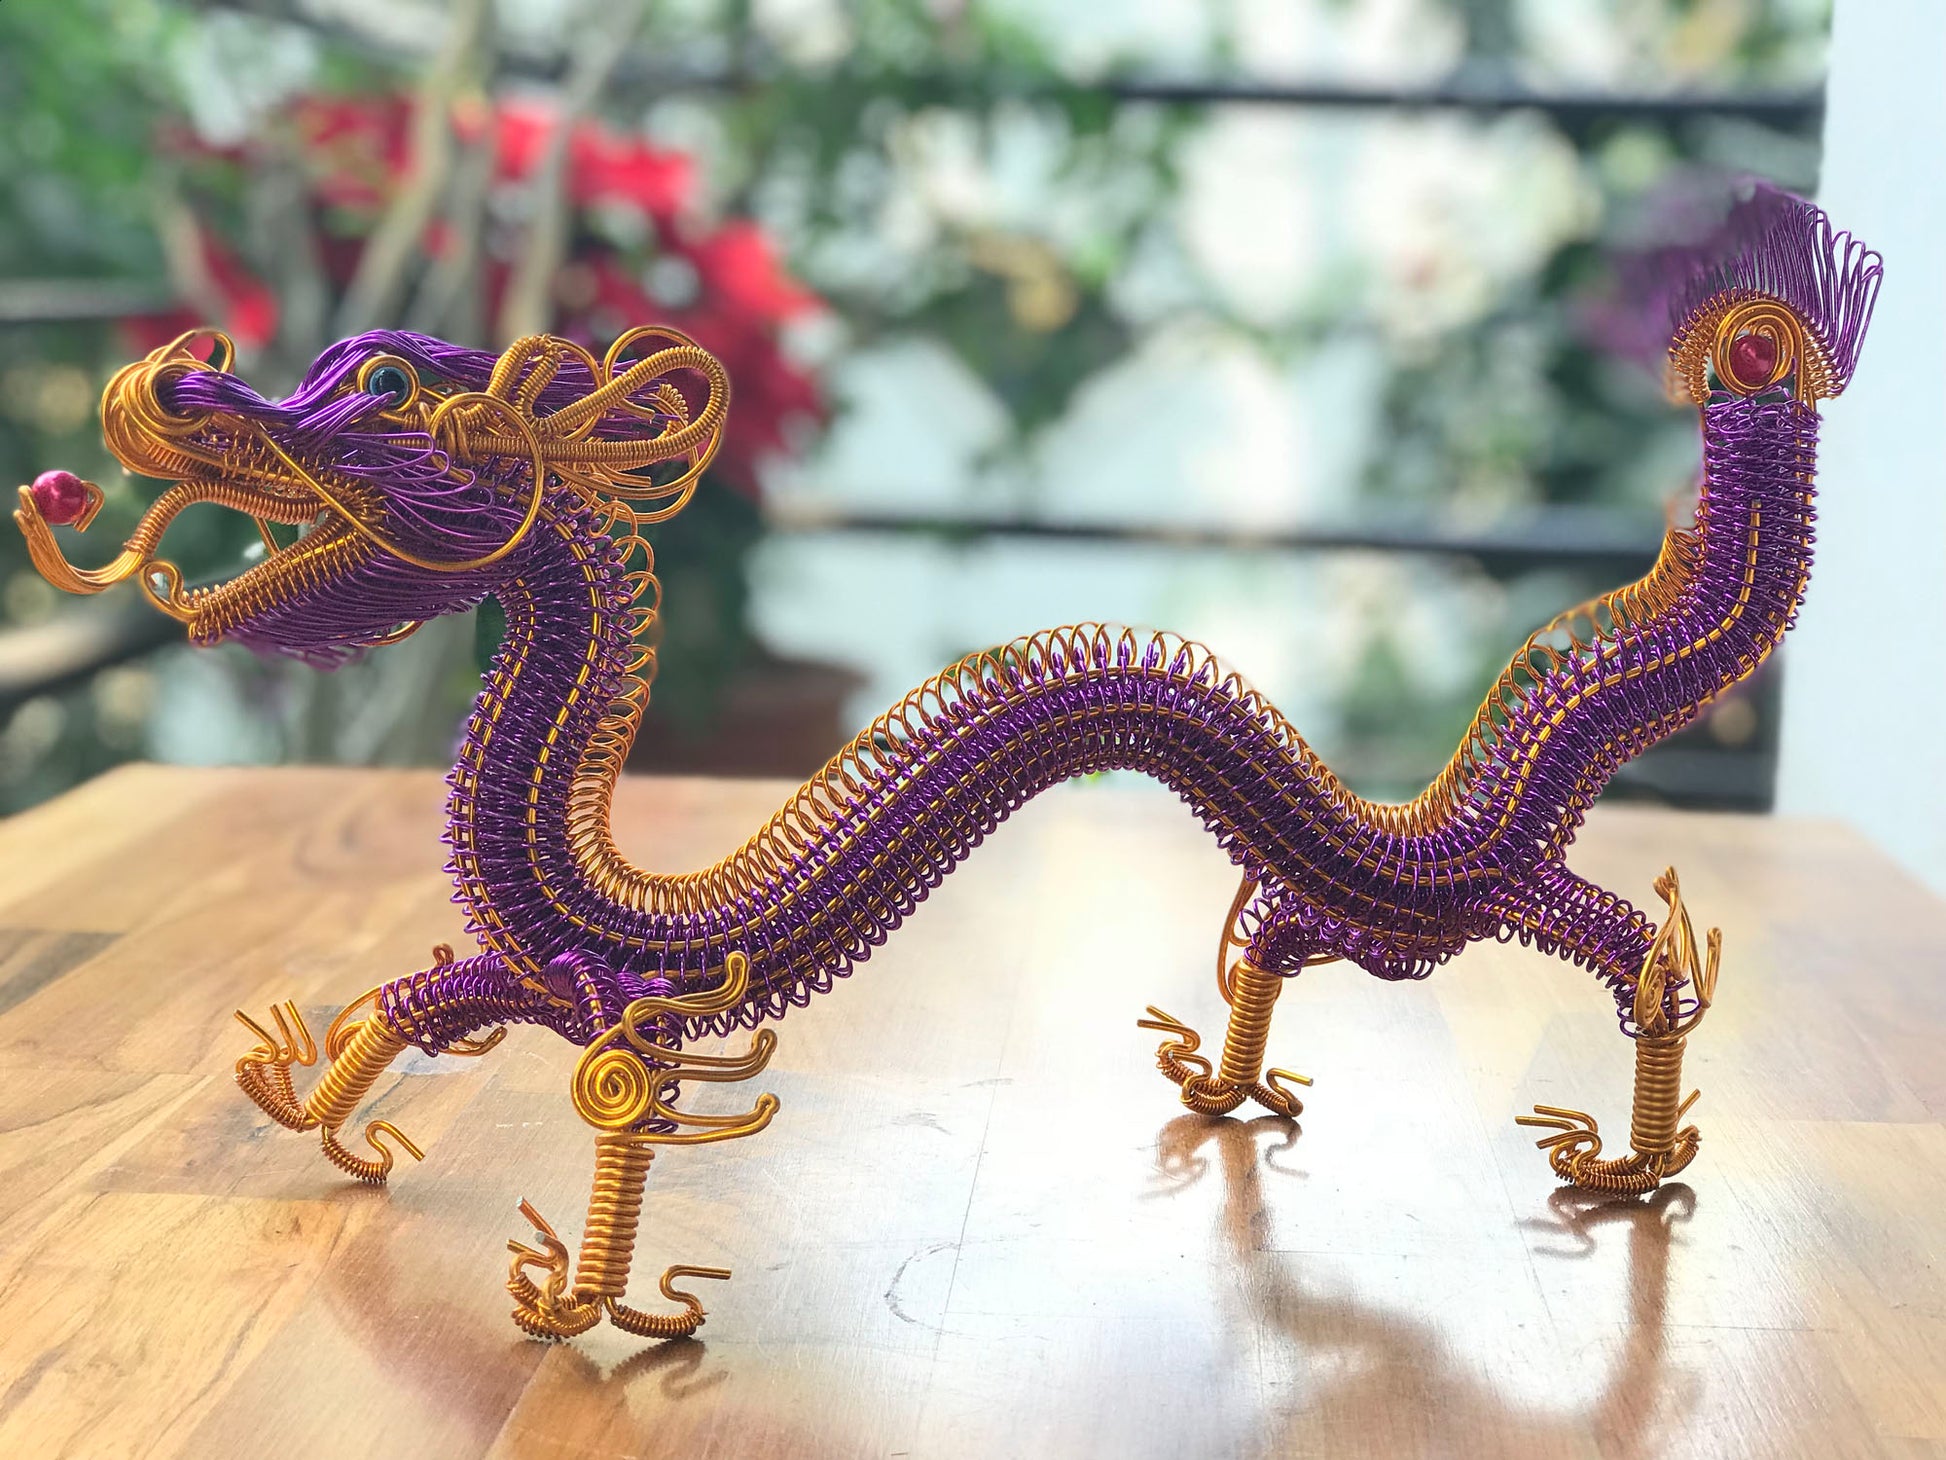 Hand-crafted wire art dragon